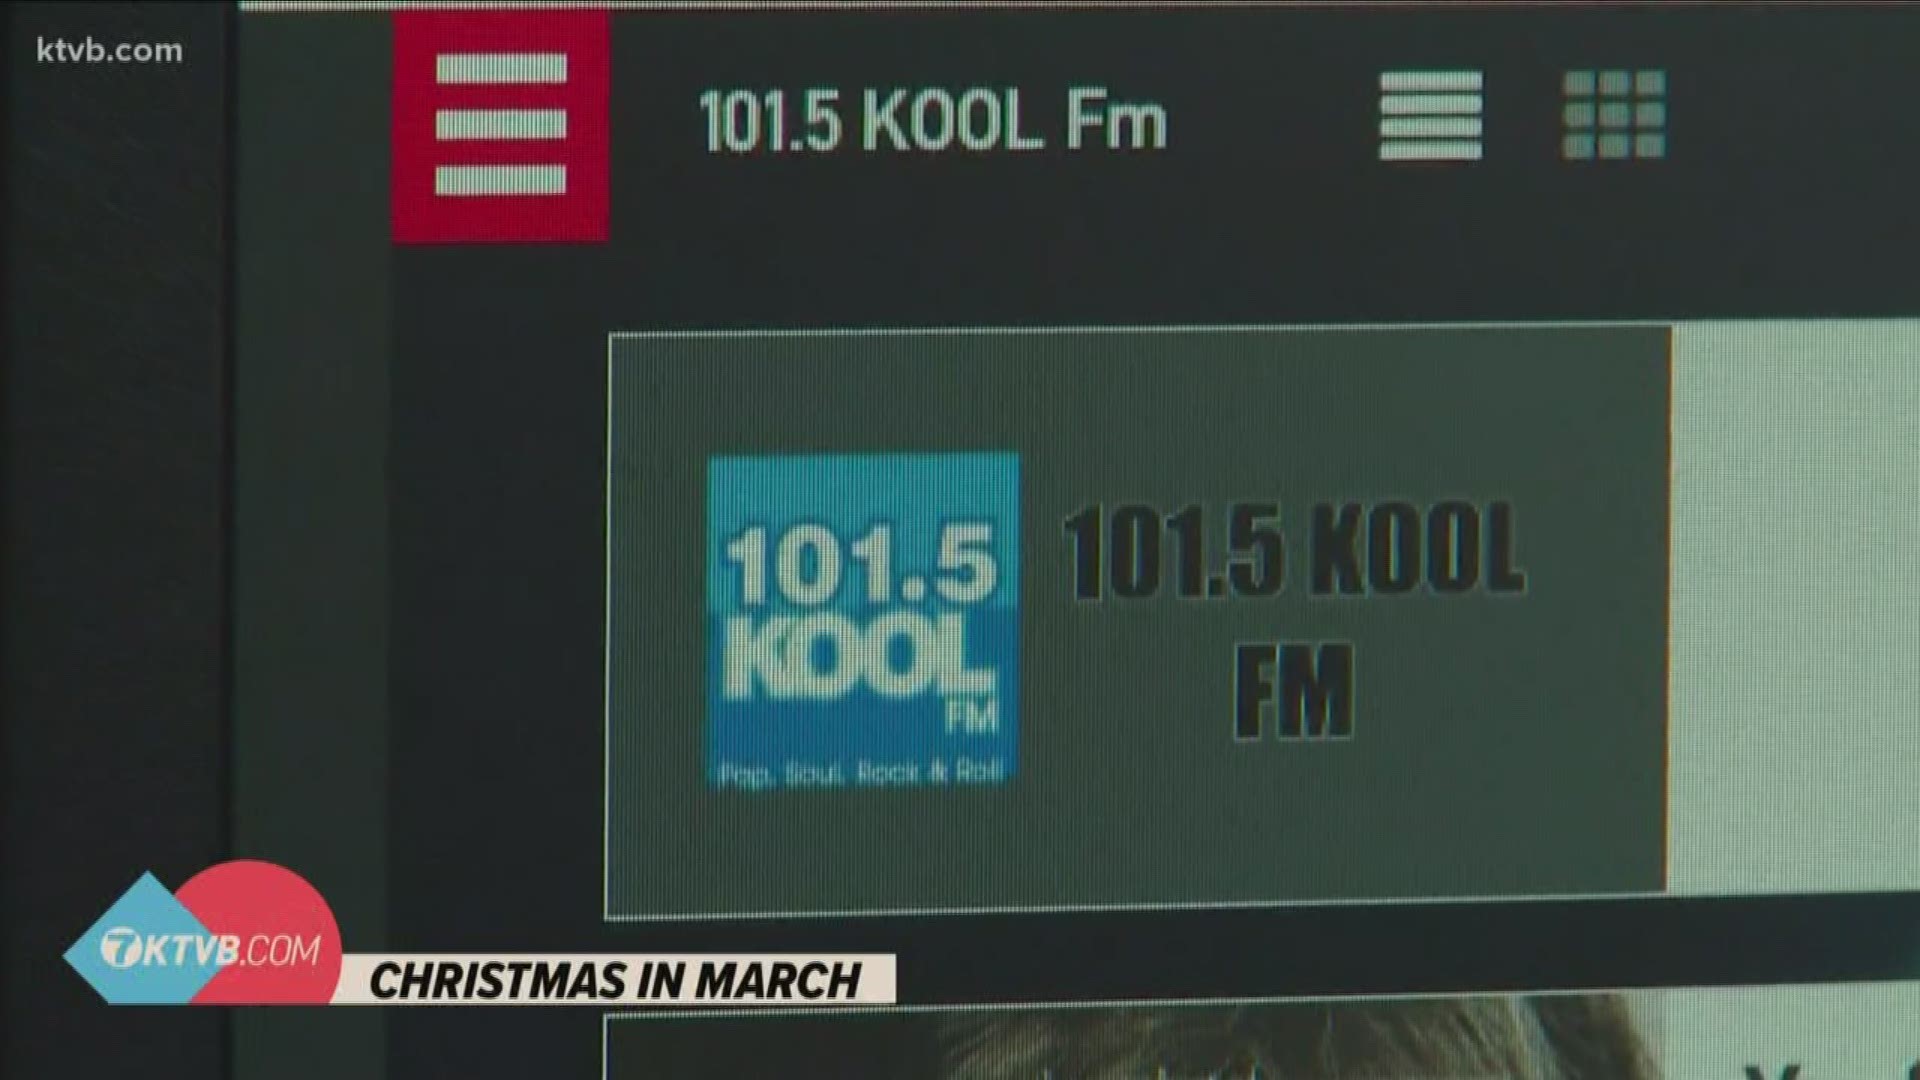 KOOL 101.5 FM is playing Christmas music for 24 hours. Disc jockey KJ Mac says he hopes this will make people smile at little bit more.